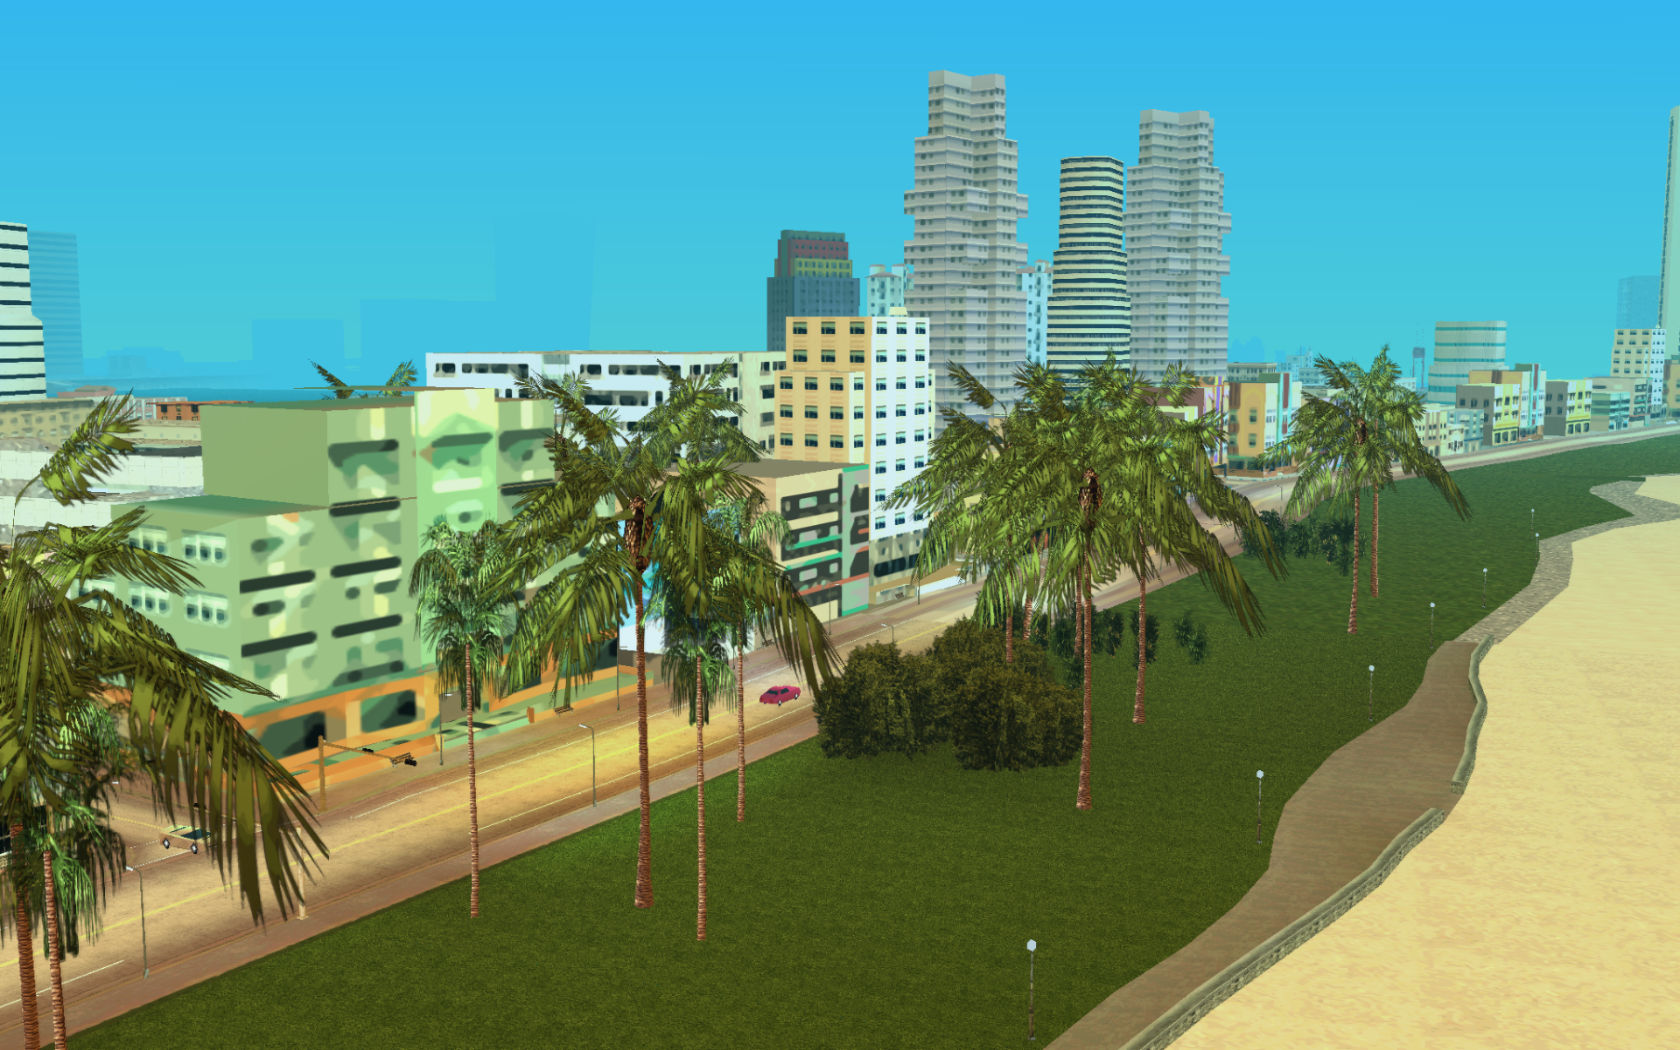 GTA 6's Vice City Is Already Being Mapped Out By Fans